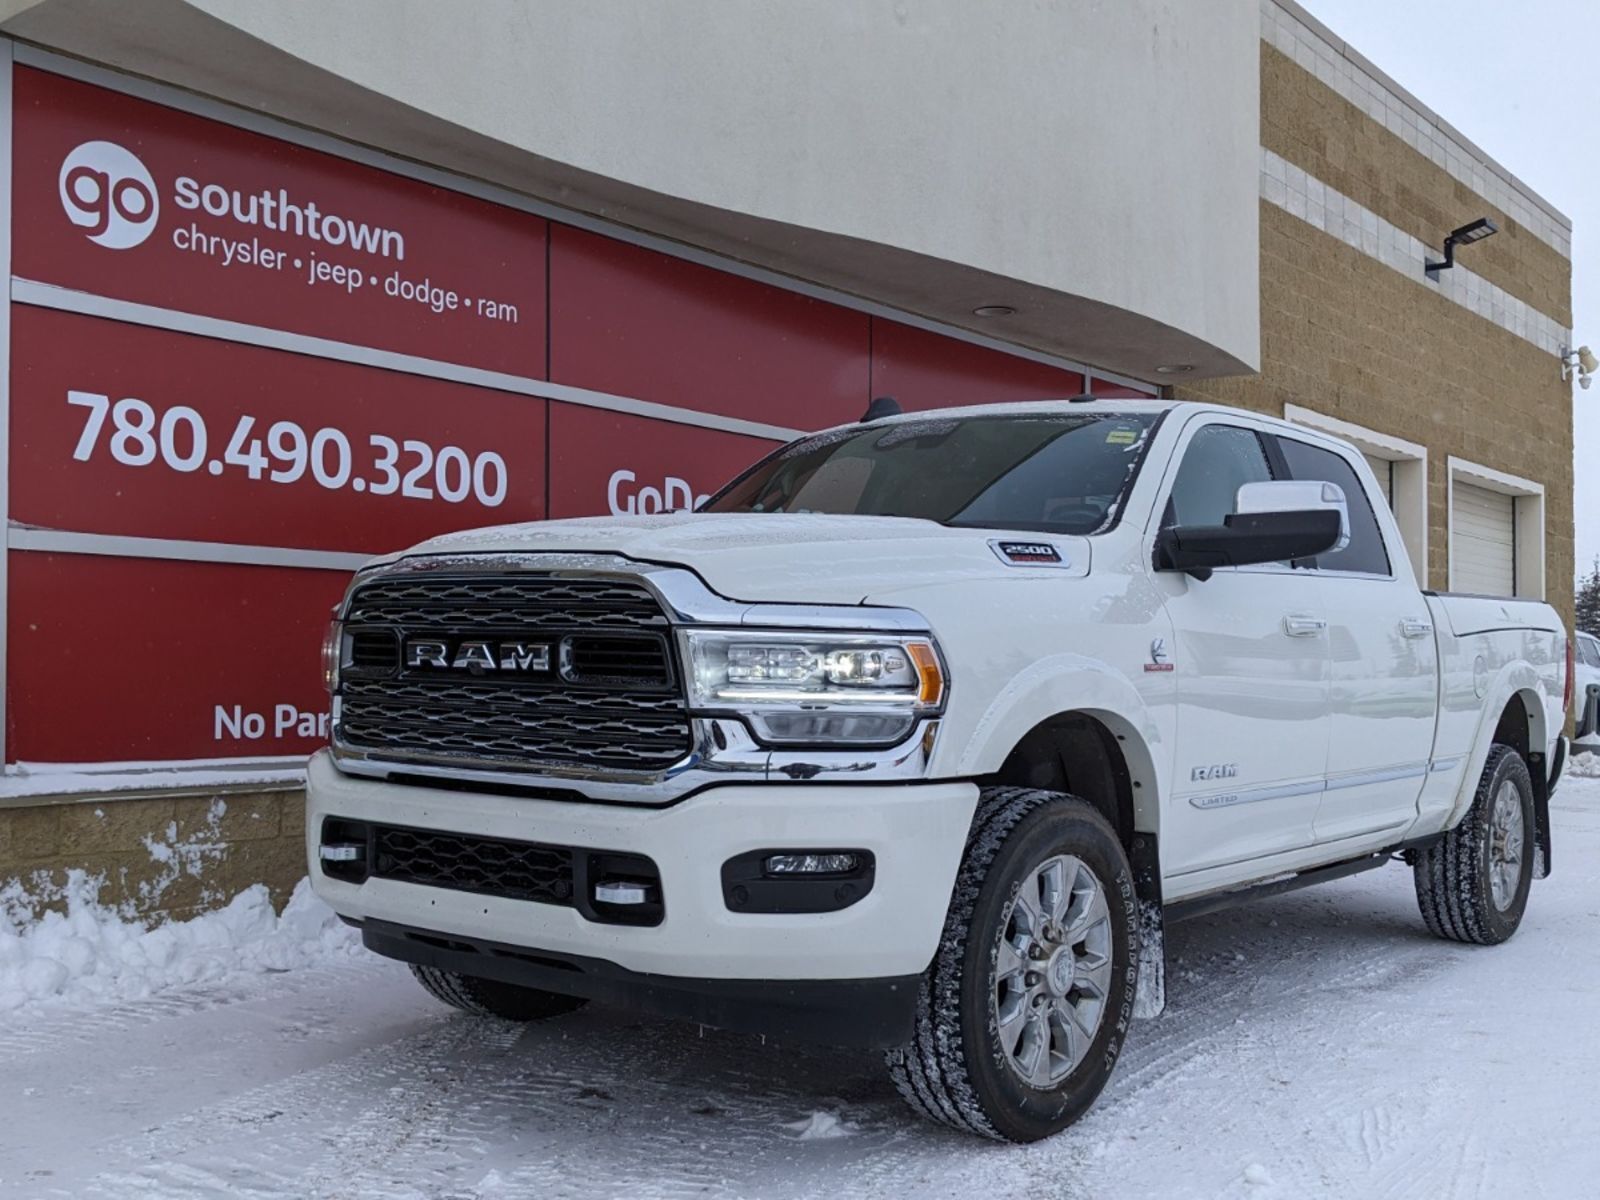 2021 Ram 2500 LIMITED IN PEARL WHITE EQUIPPED WITH A 6.7L CUMMIN